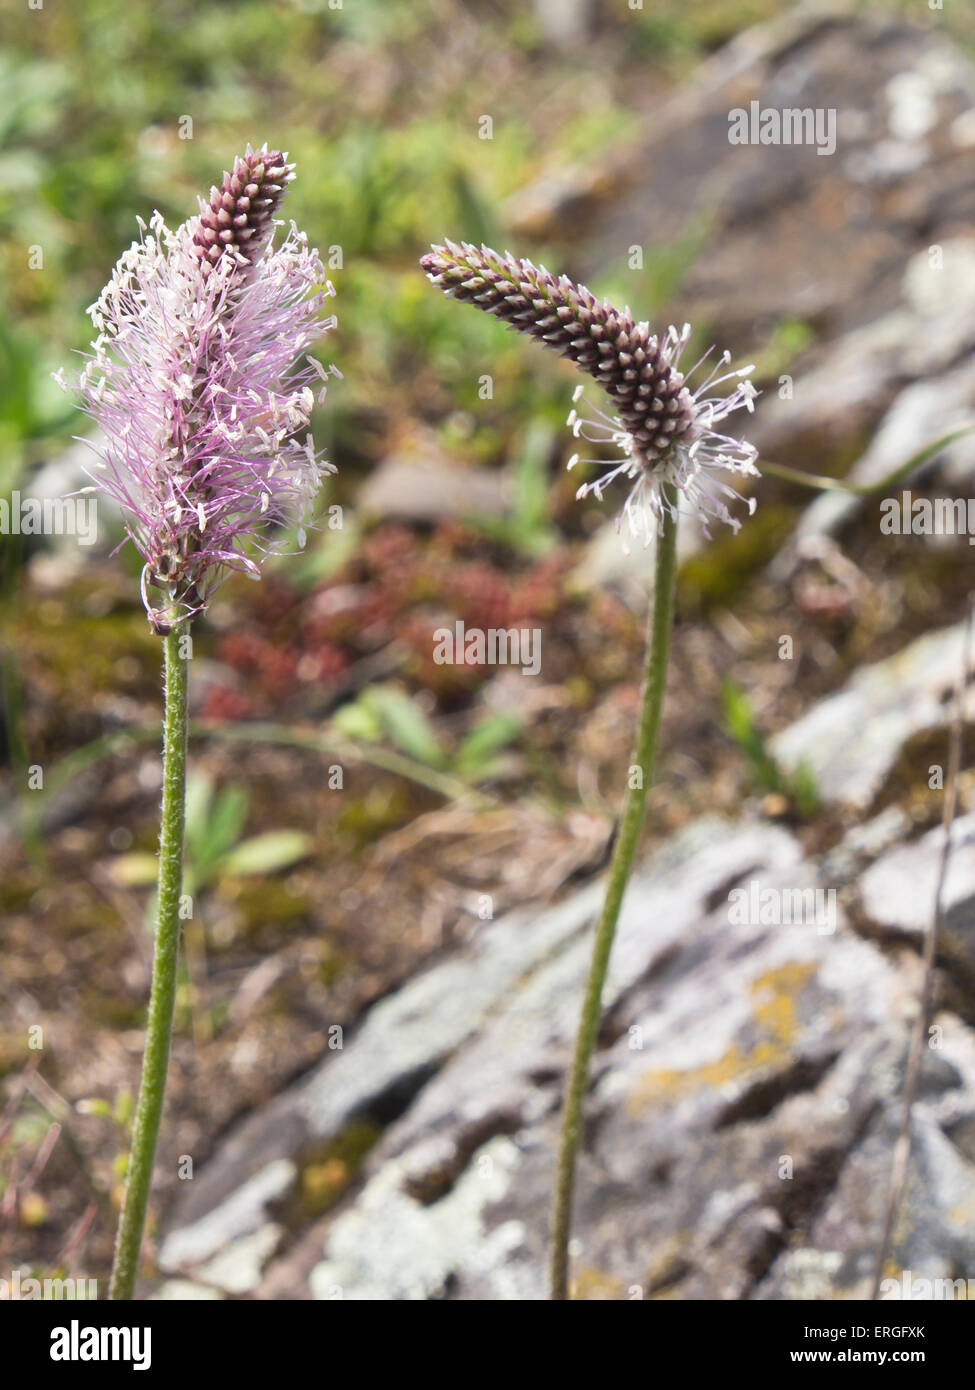 Plantago media, hoary plantain, traditionally a medicinal plant has delicate white to purple flower, should be admired close up, Oslo Norway Stock Photo